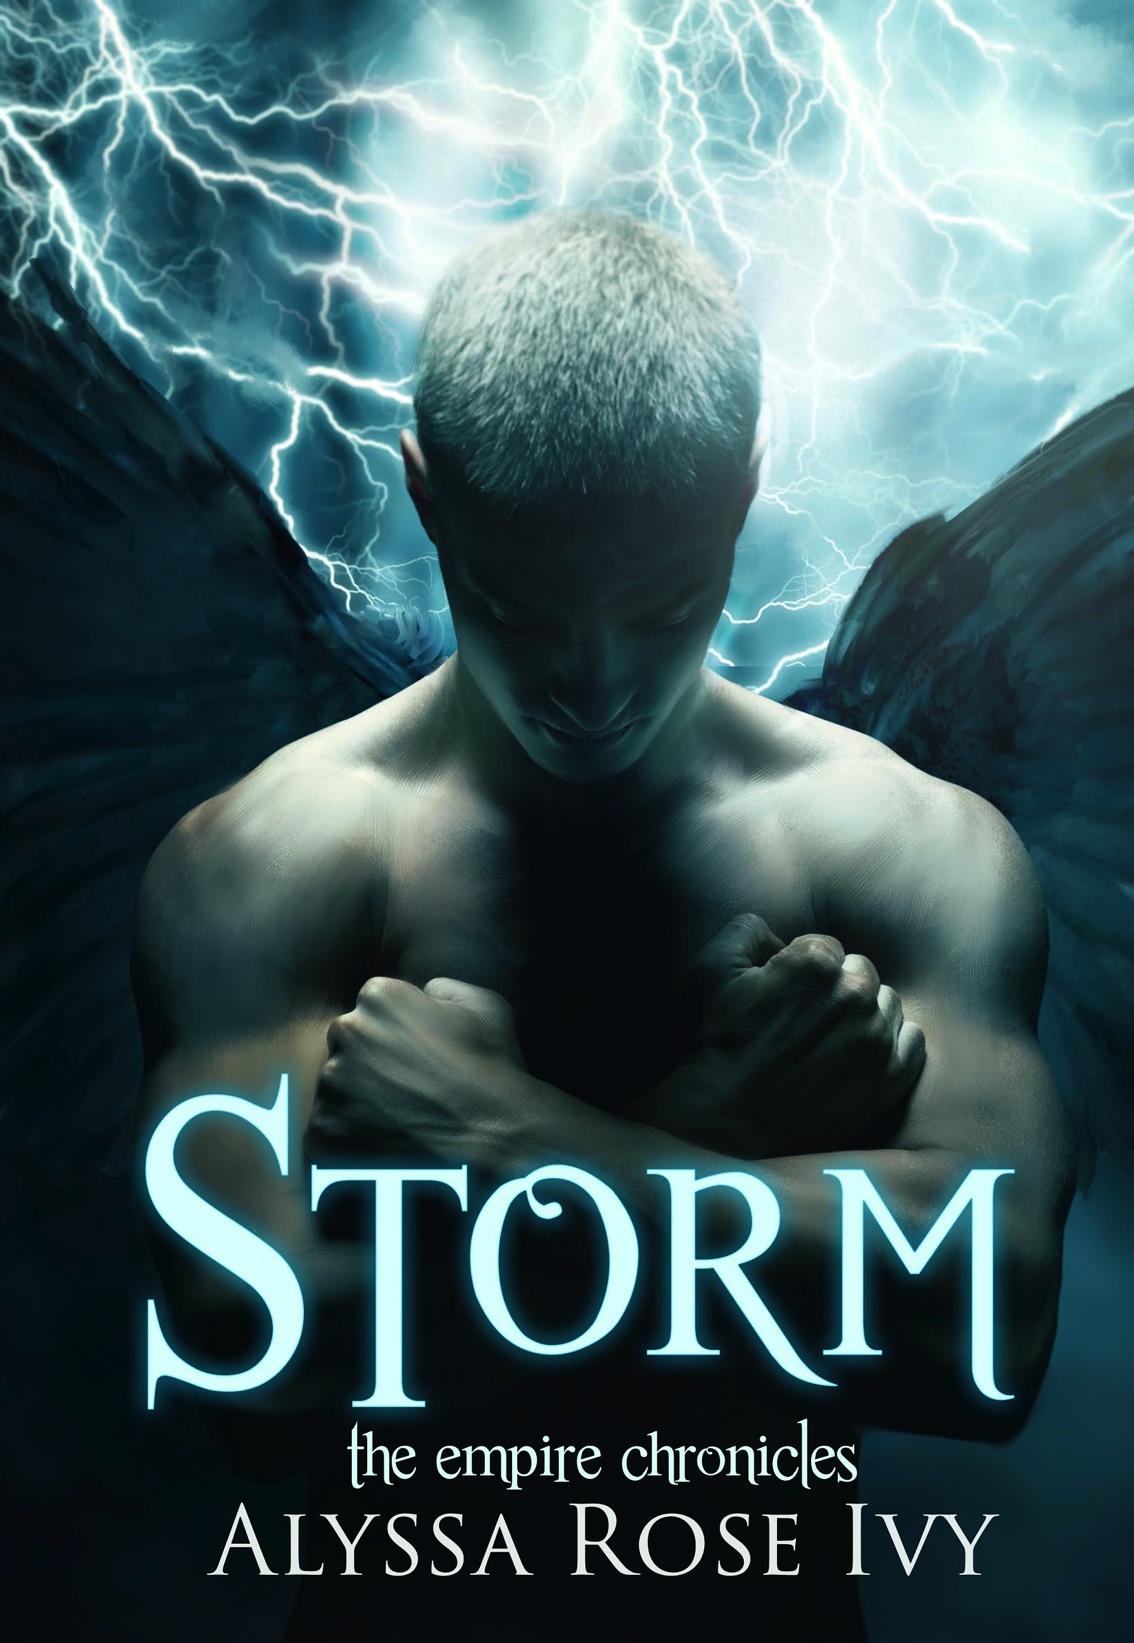 Storm: The Empire Chronicles by Alyssa Rose Ivy